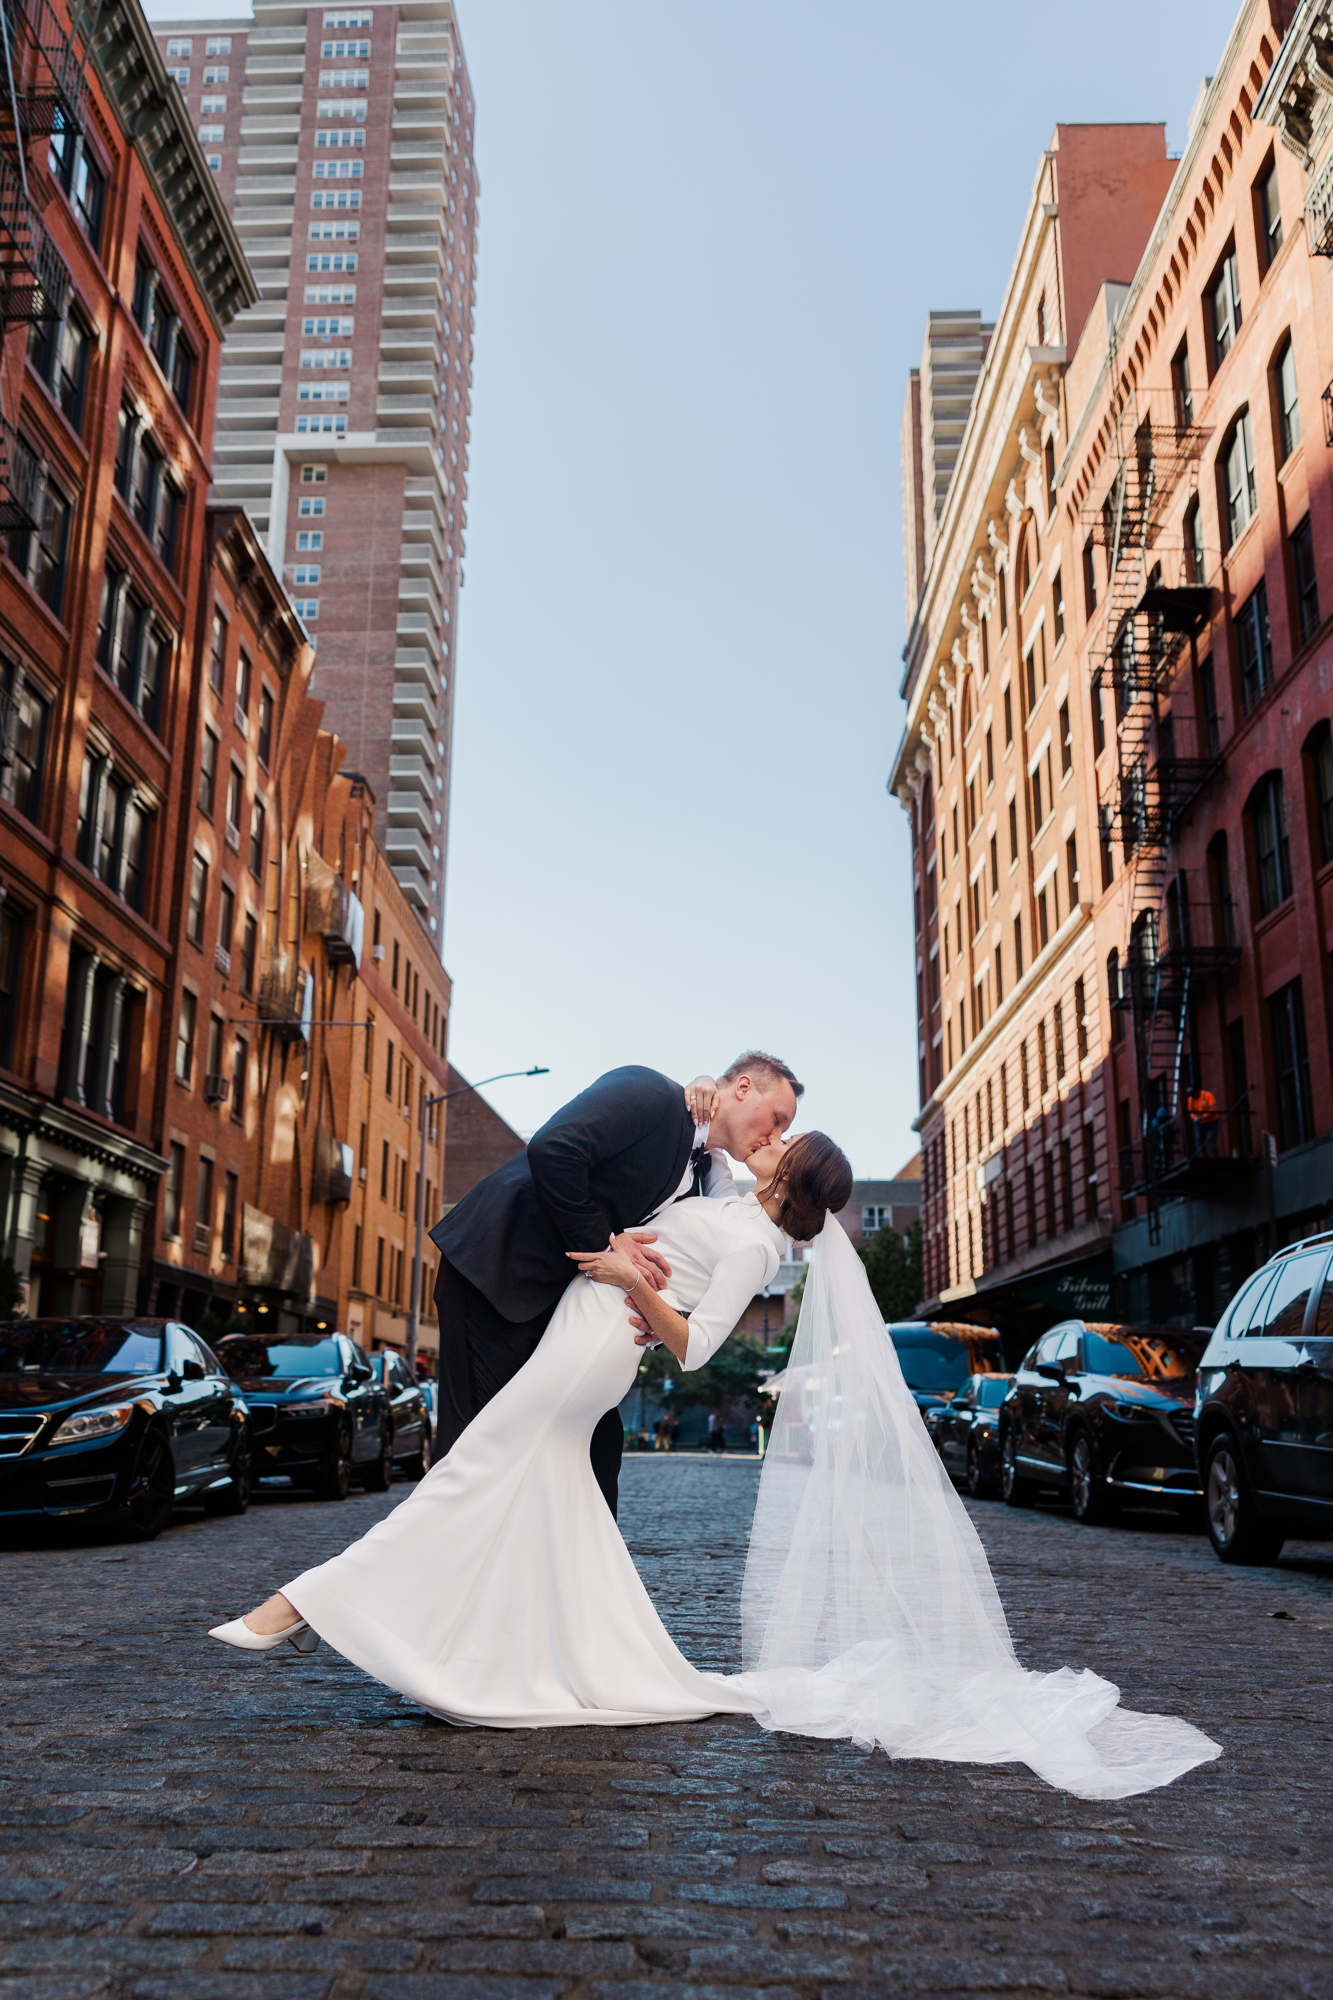 What to look for in a Wedding Photographer Package